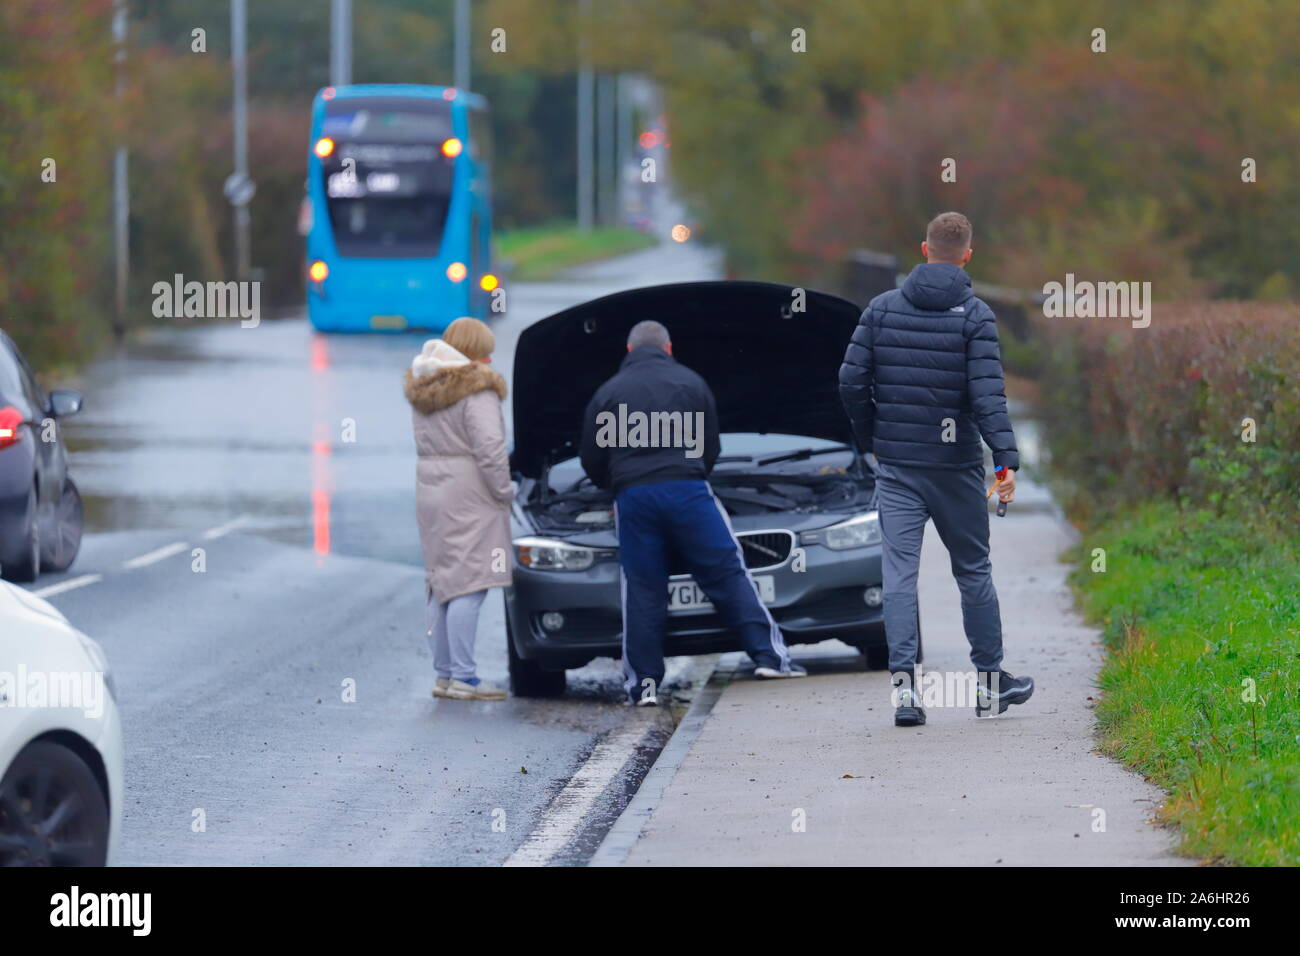 26th October 2019, Castleford,West Yorkshire,UK _ Motorists risk driving through Barnsdale Road floods after 24 hours of heavy rainfall. Stock Photo